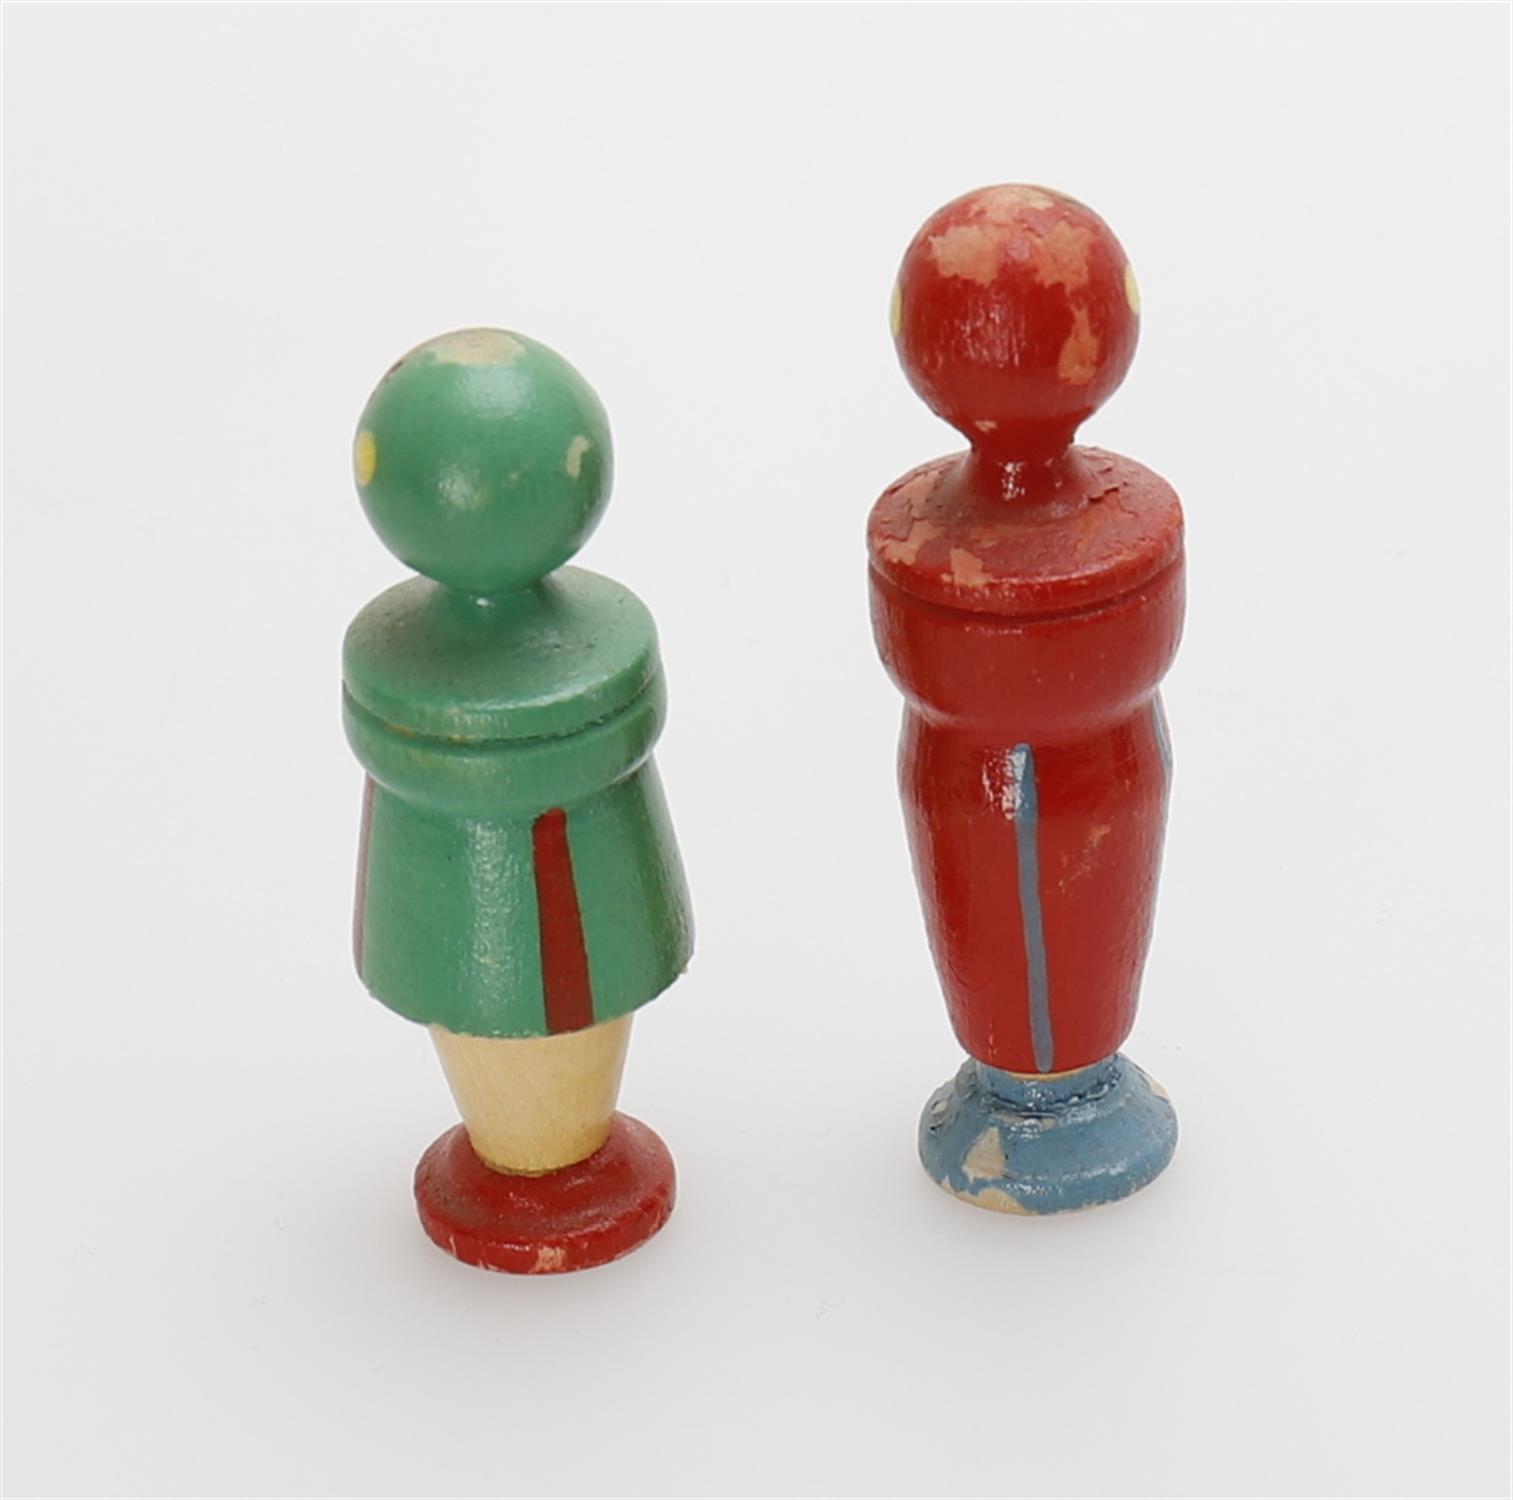 An early 1960s Soviet painted wooden space rocket matryoshka toy - Image 3 of 6